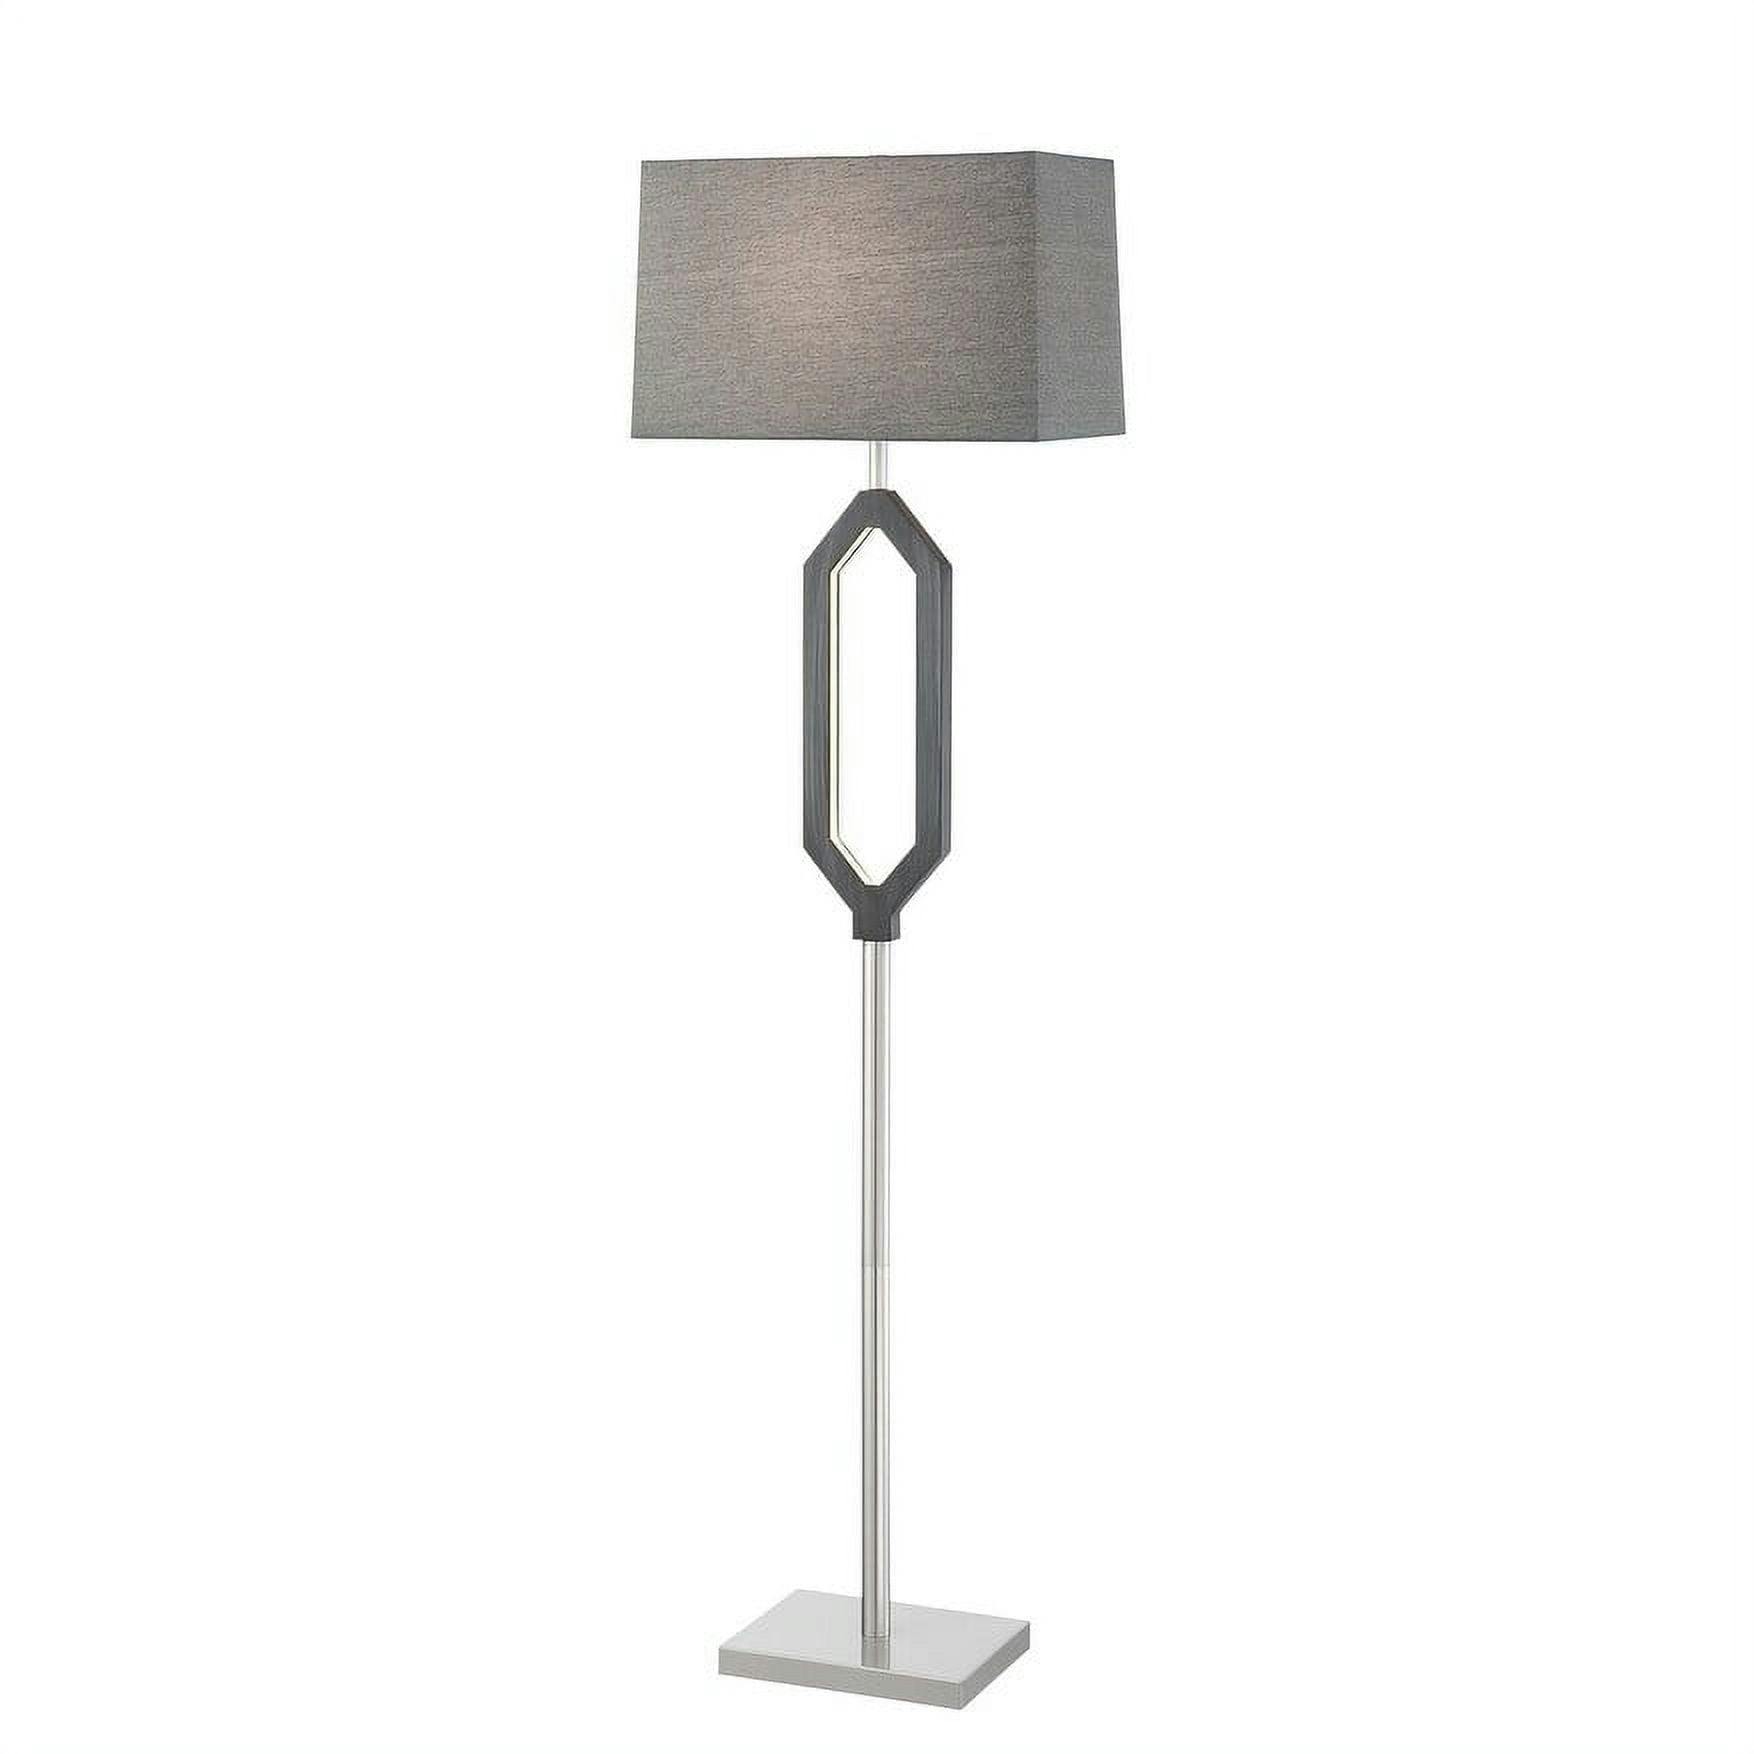 Desmond Charcoal Grey Metal Floor Lamp with White Fabric Shade